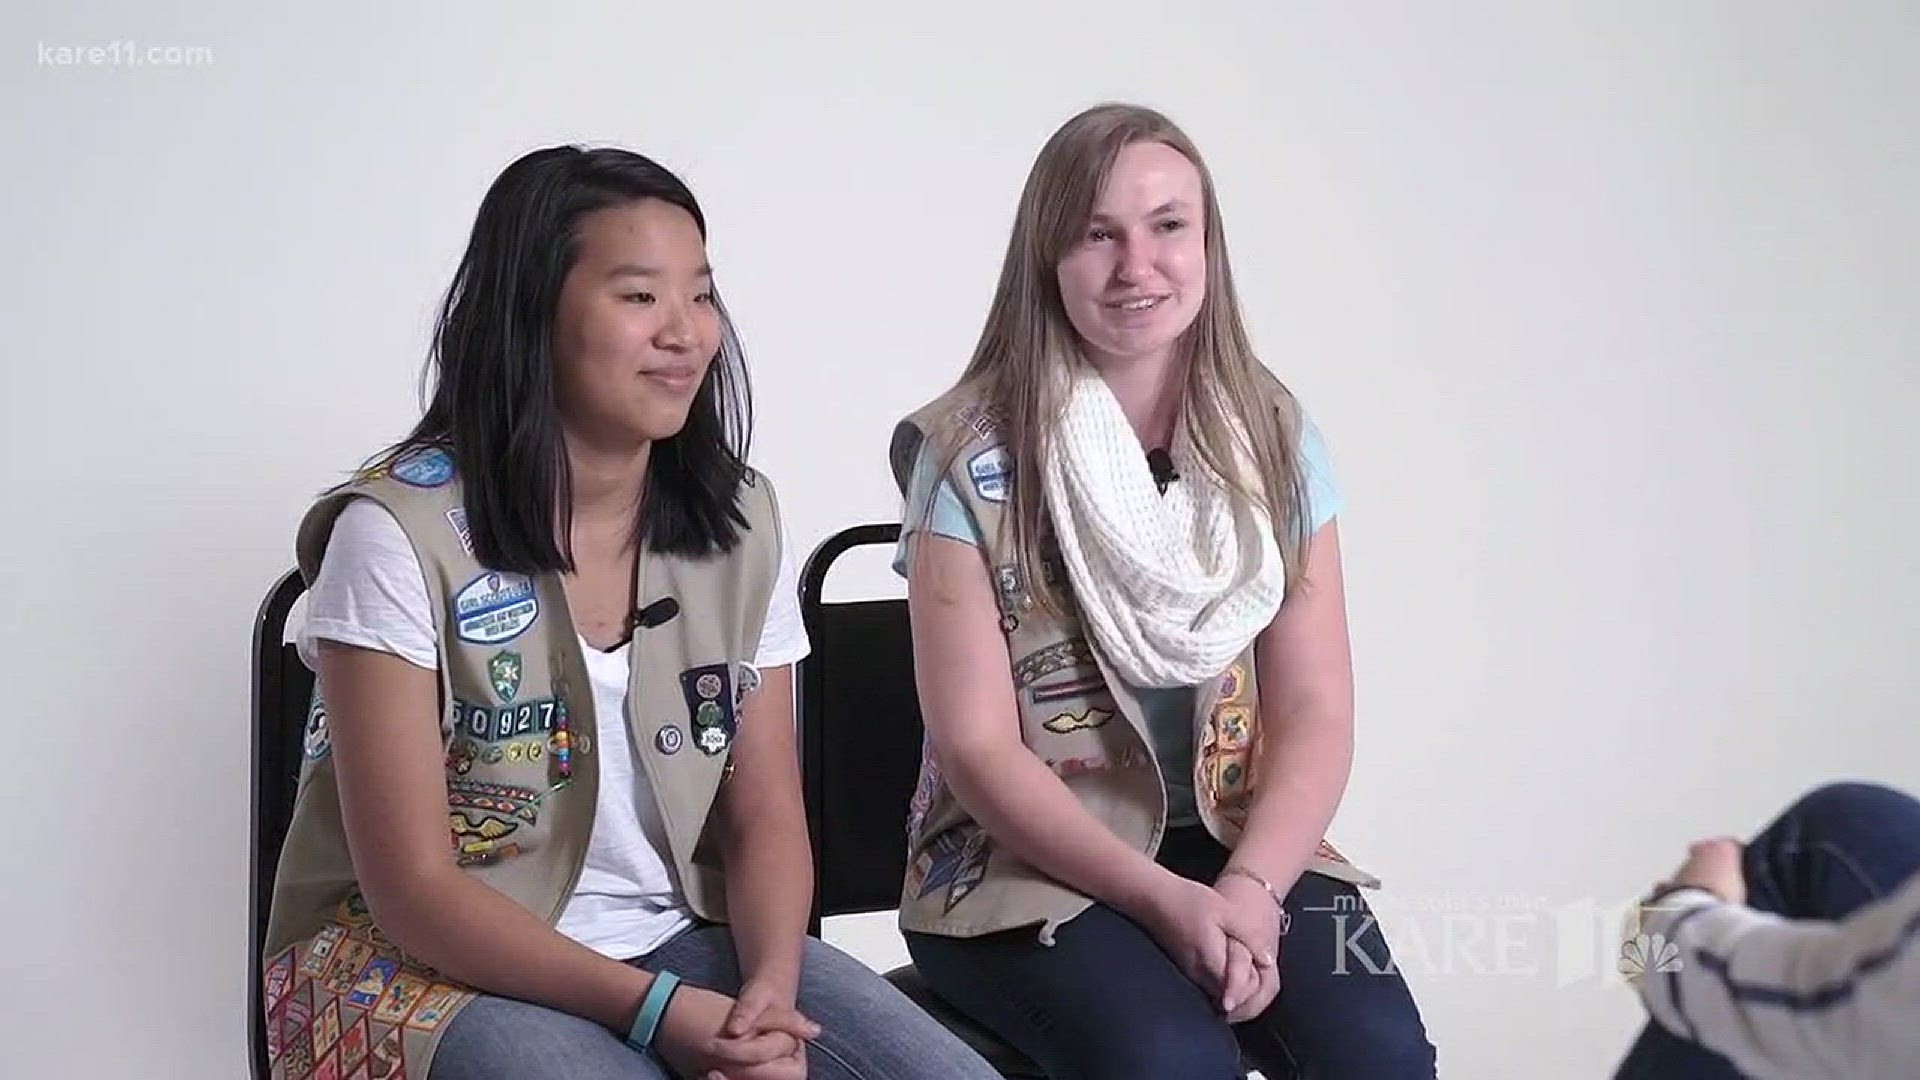 Girl Scouts isn't just for girls